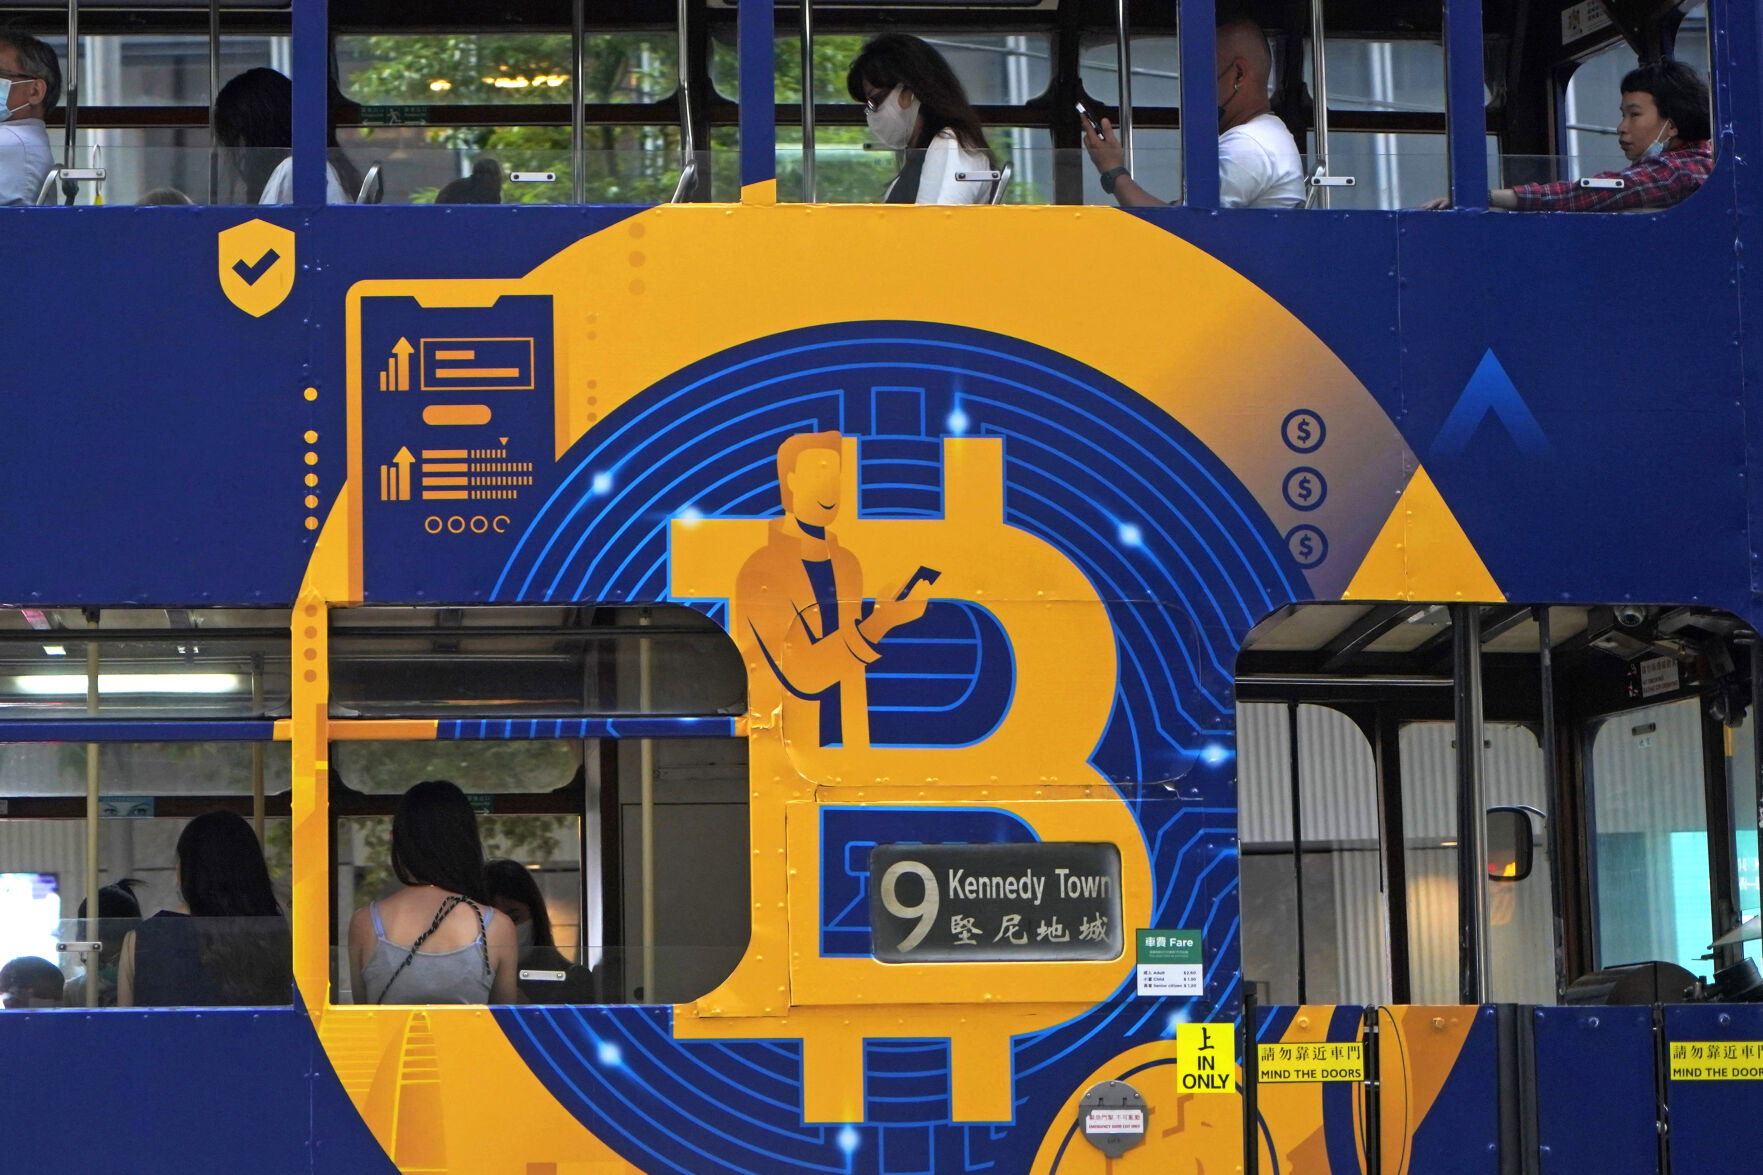 <p>FILE - An advertisement for the cryptocurrency Bitcoin displayed on a tram, May 12, 2021, in Hong Kong. Sometime in the next few days or even hours, the “miners” who chisel bitcoins out of complex mathematics are going to take a 50% pay cut — effectively slicing new emissions of the world’s largest cryptocurrency in an event called bitcoin halving. (AP Photo/Kin Cheung, File)</p>   PHOTO CREDIT: Kin Cheung - staff, ASSOCIATED PRESS